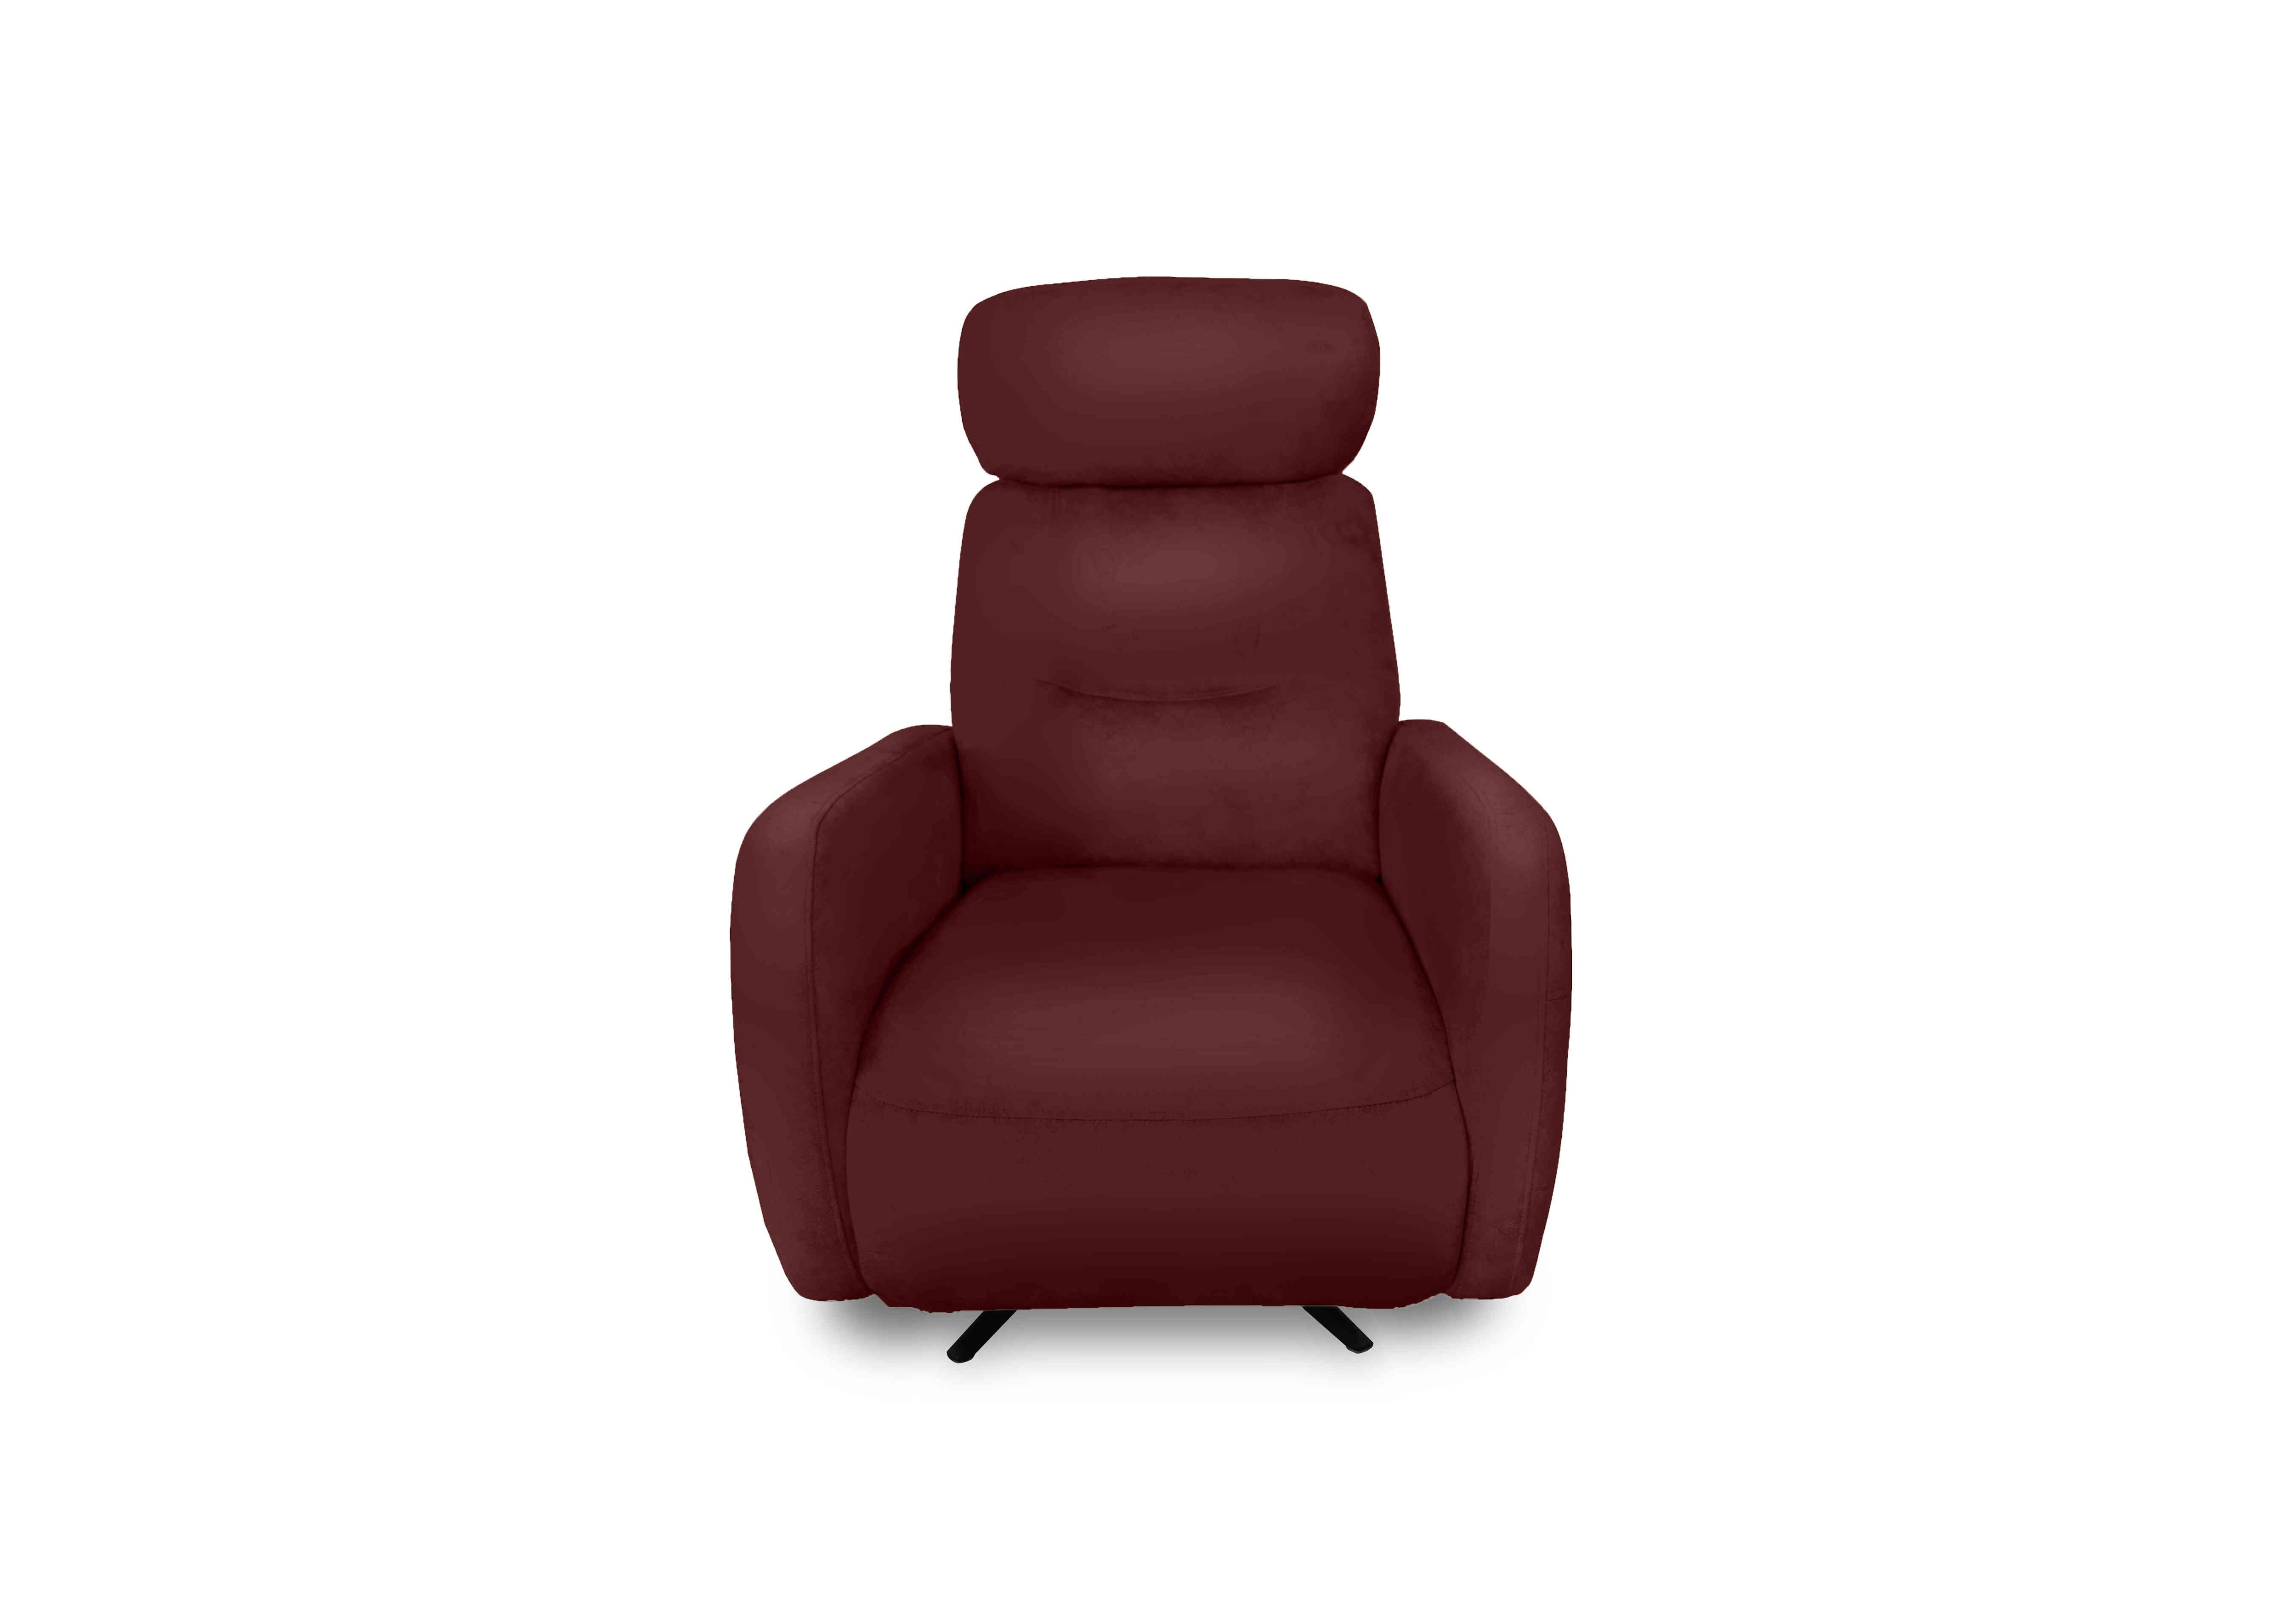 Designer Chair Collection Tokyo Leather Manual Recliner Swivel Chair in Bv-035c Deep Red on Furniture Village